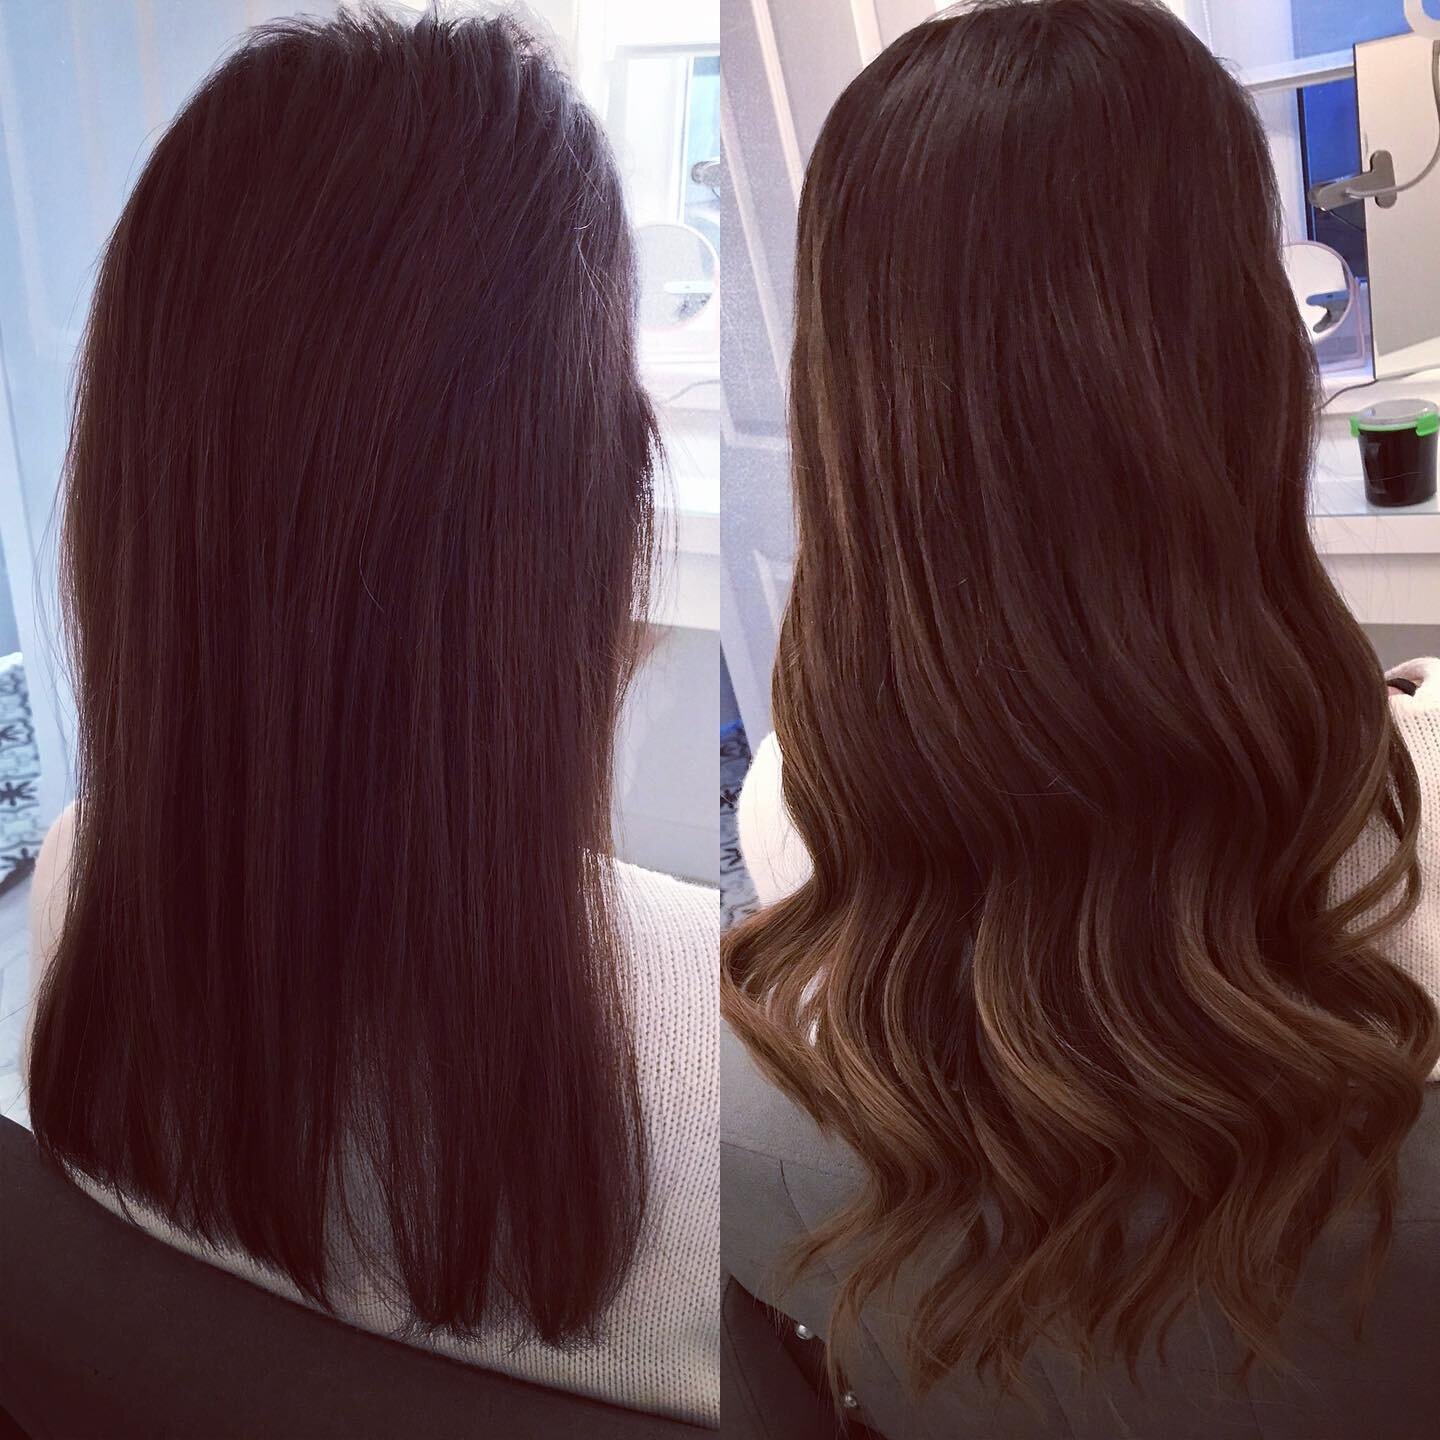 100g Remi Cachet pre-bonded hair extensions. Added length, thickness and highlights to natural hair 😍 #hair #hairextension #remicachet